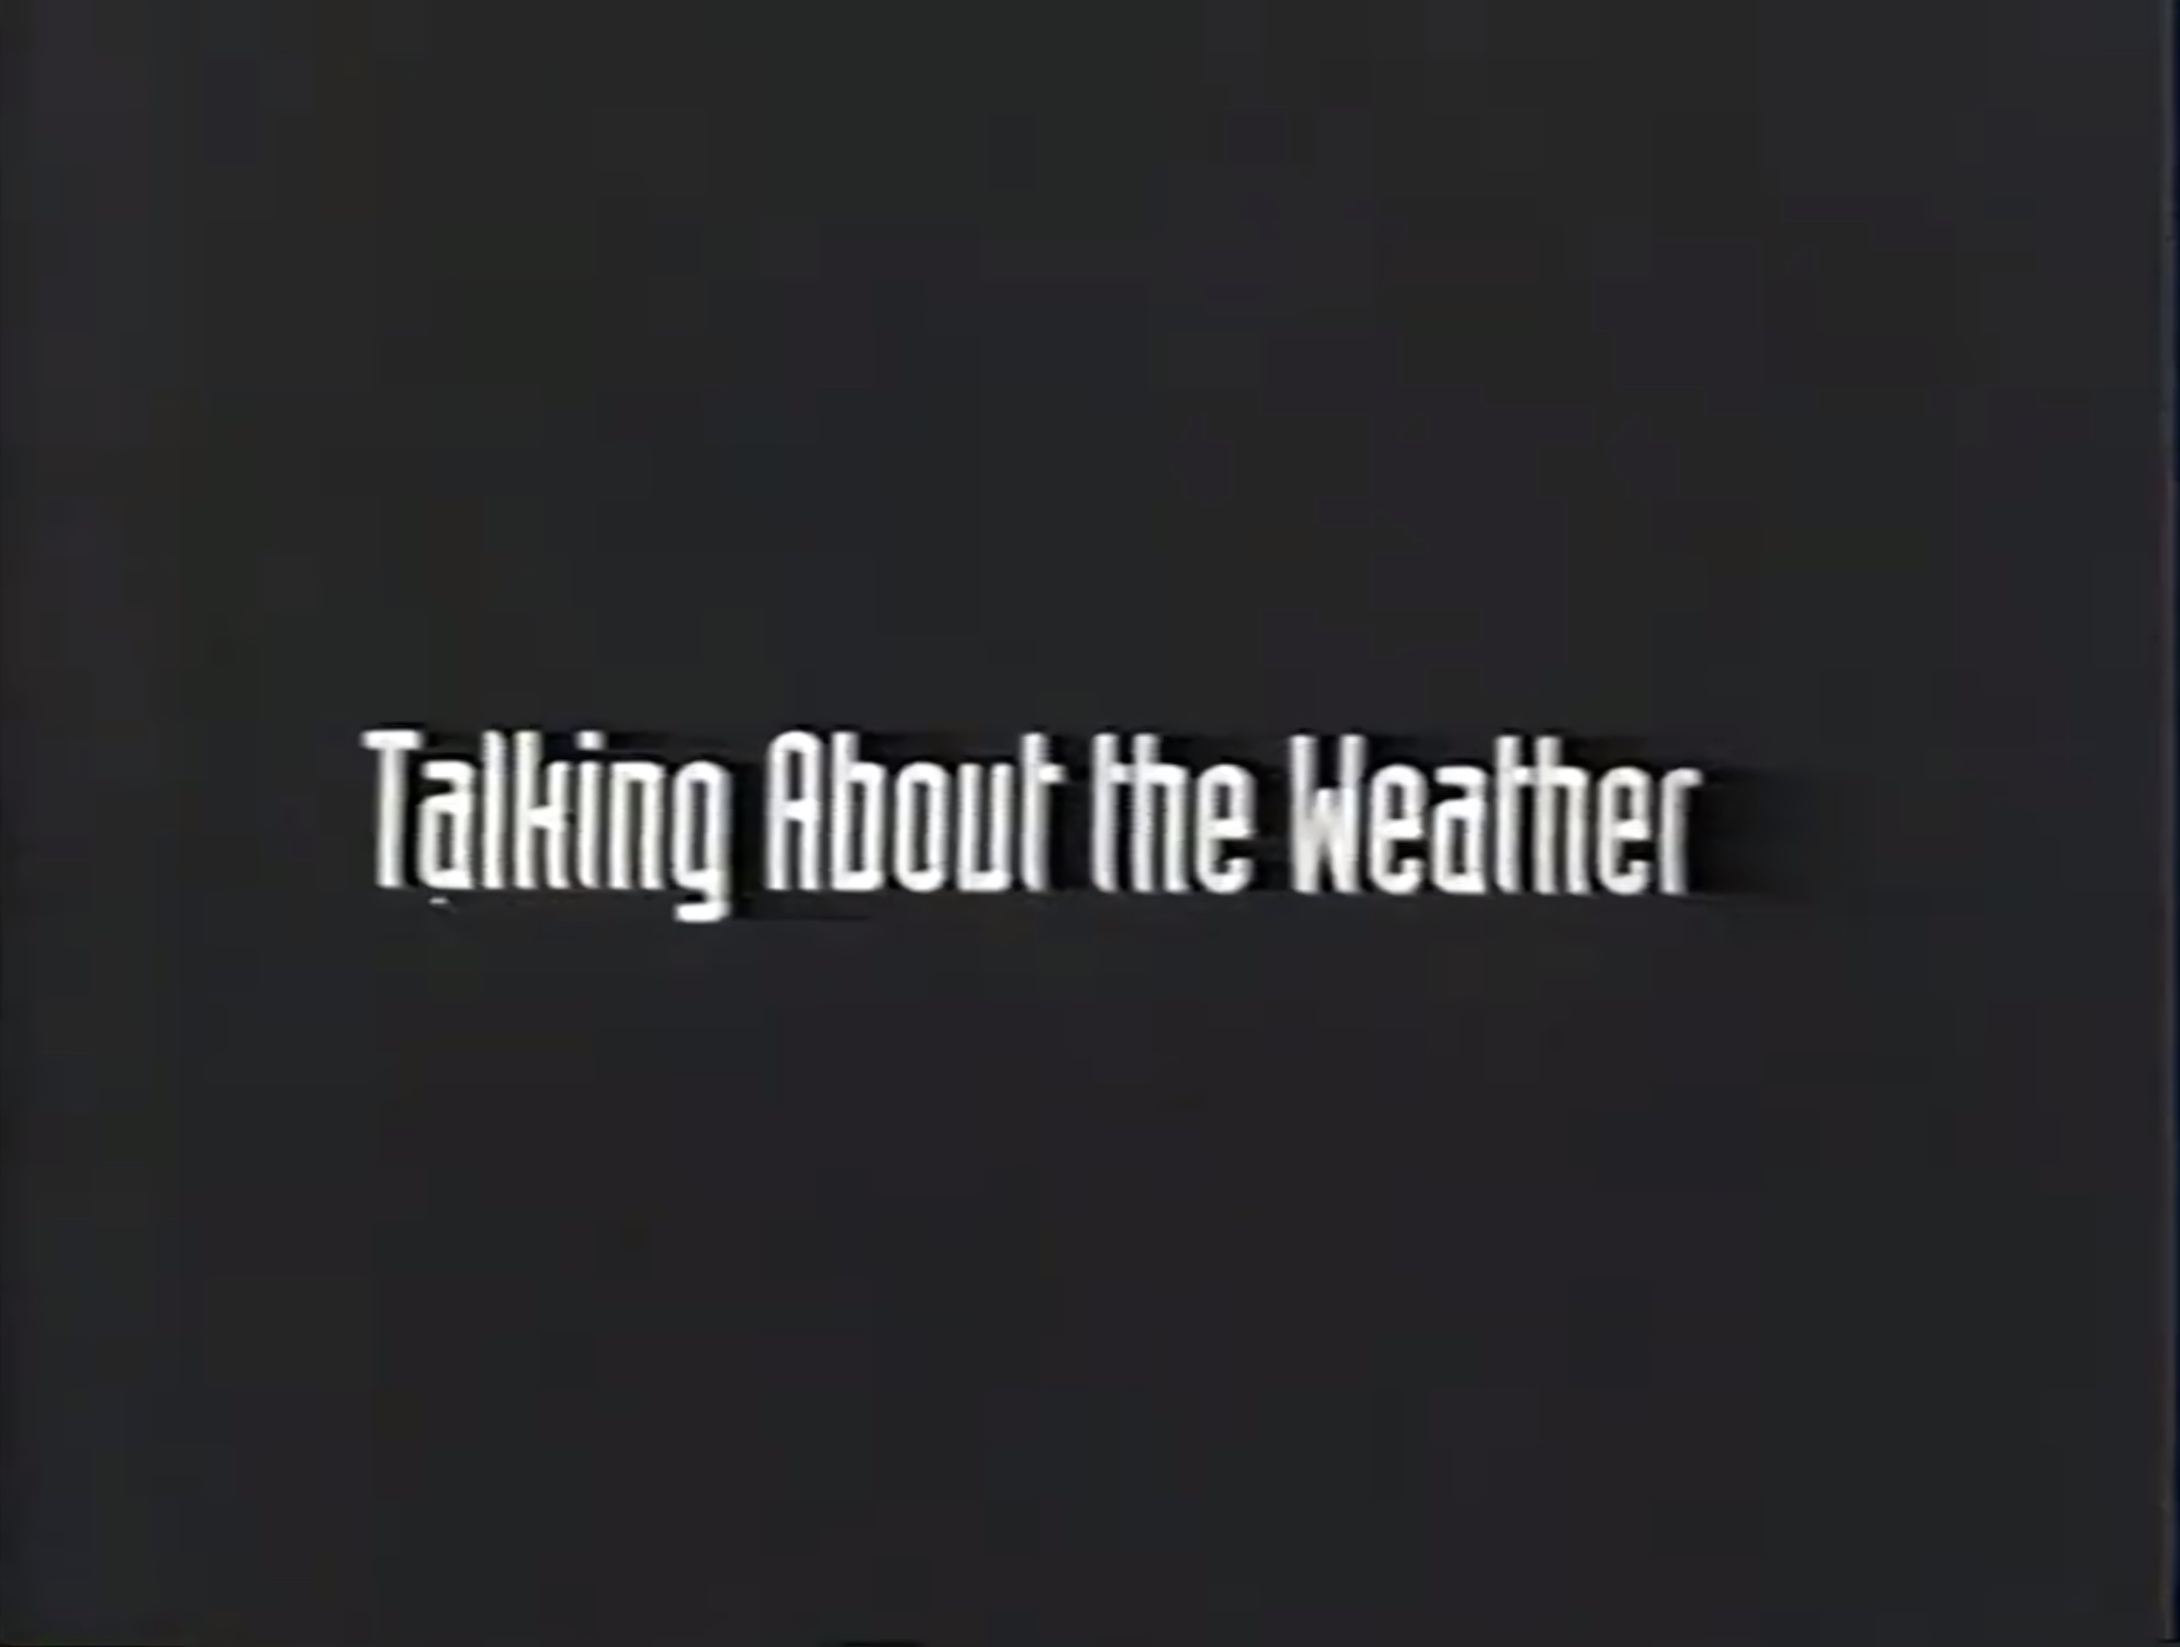 Talking about the weather title.jpeg